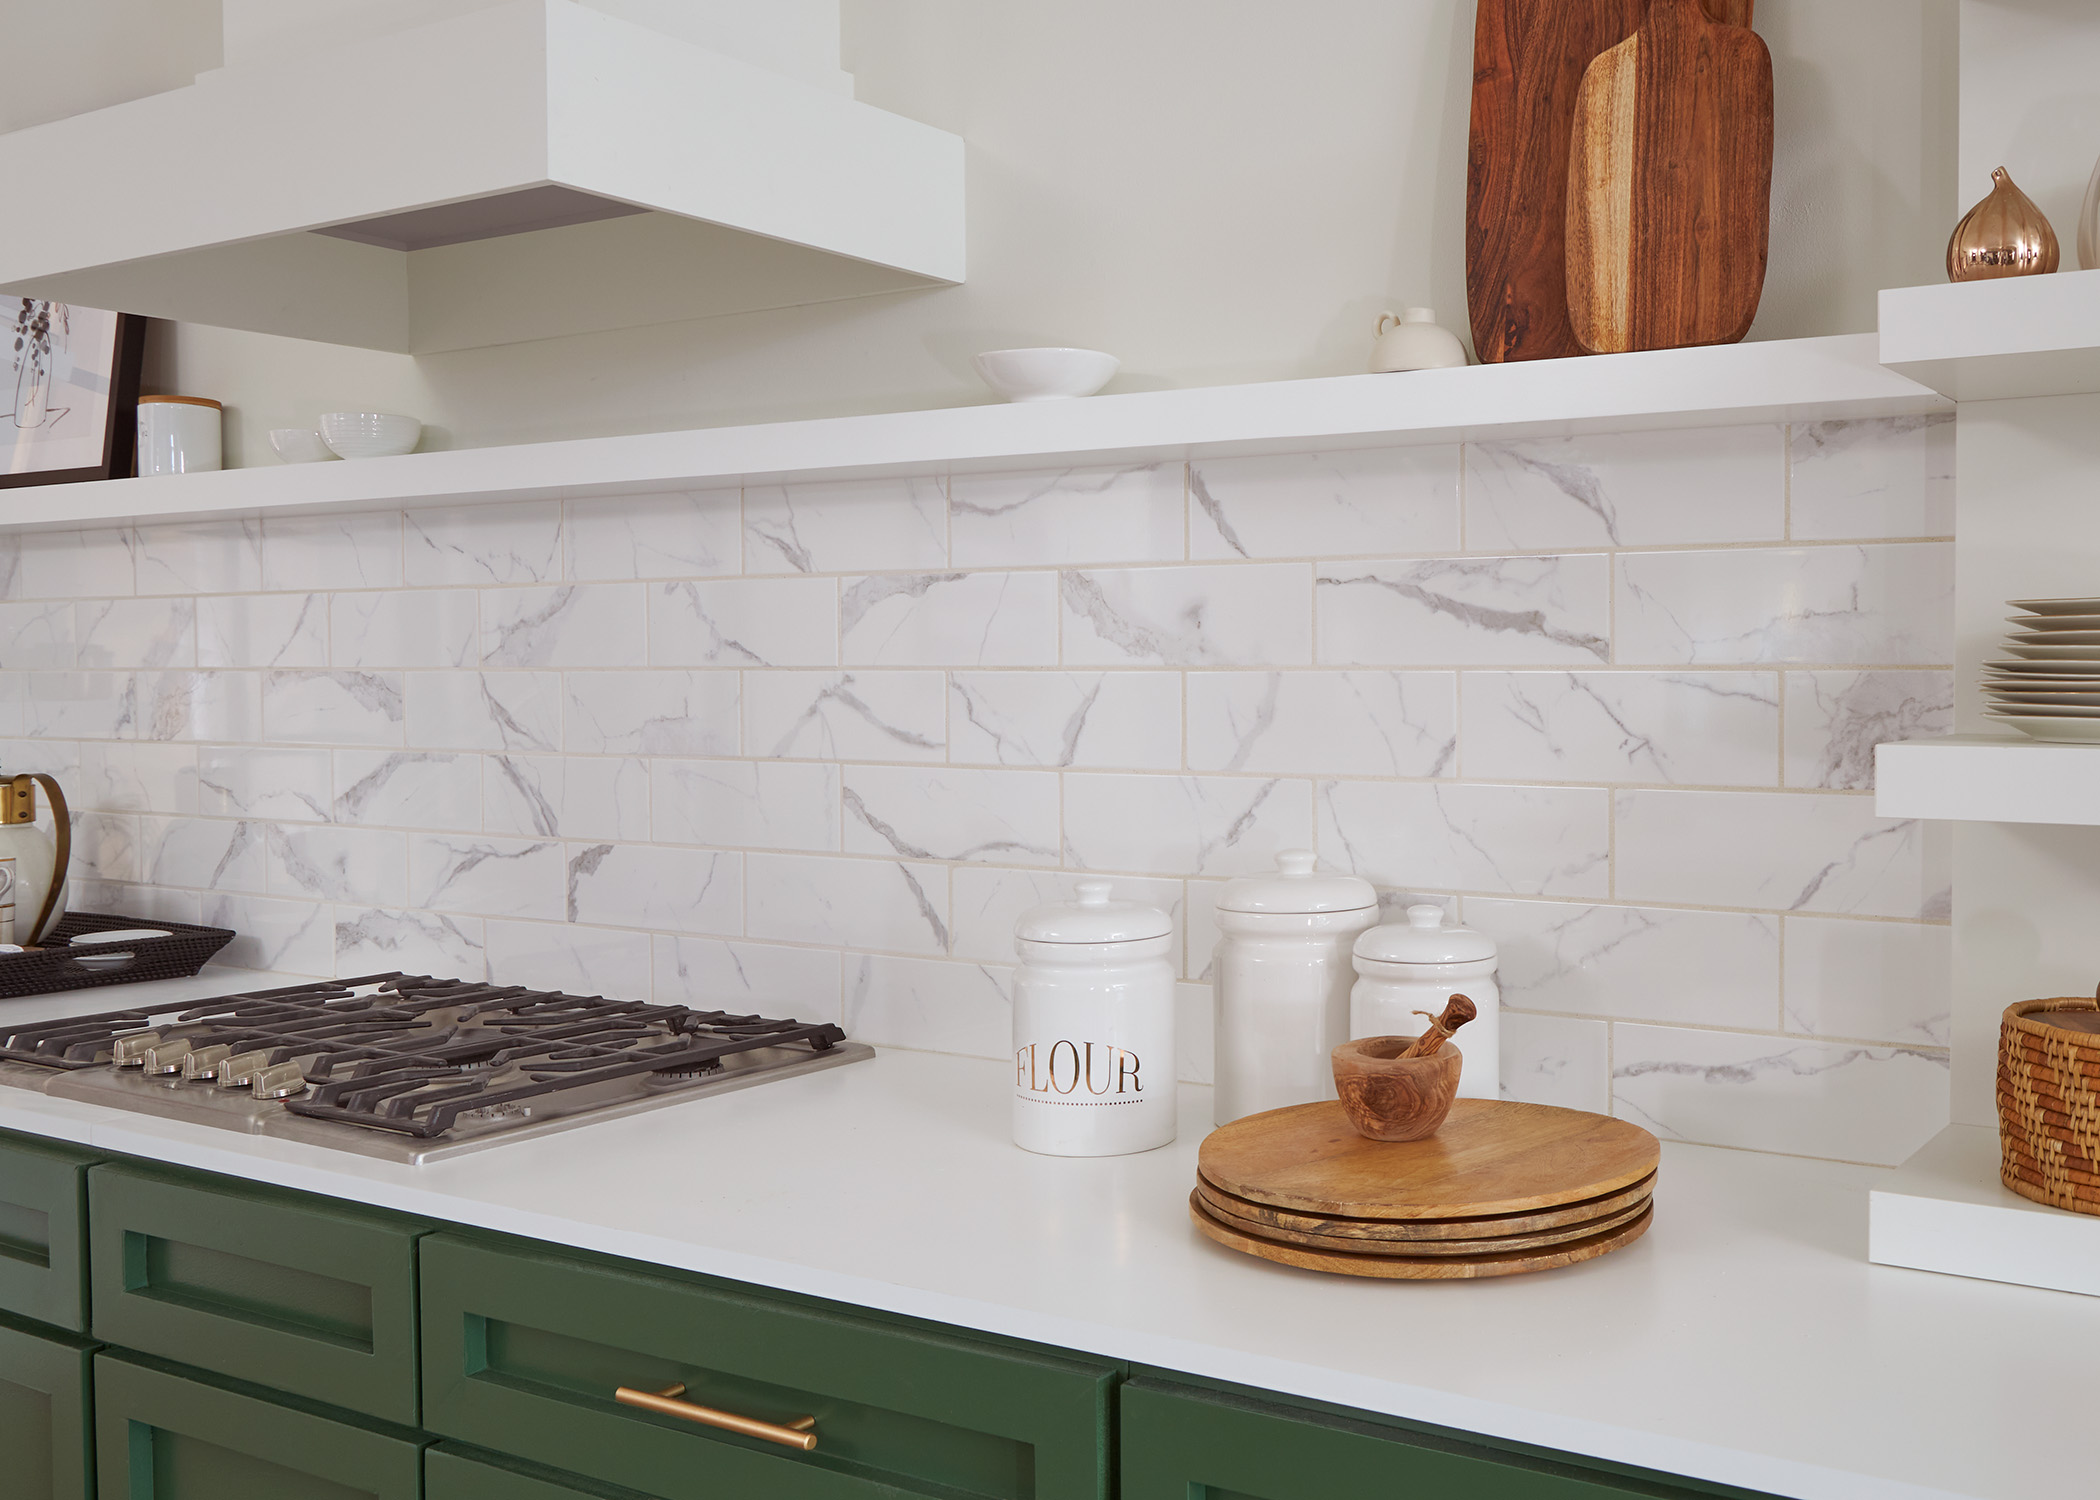 Carrara subway tile on backsplash in kitchen with dark green cabinets and white countertops